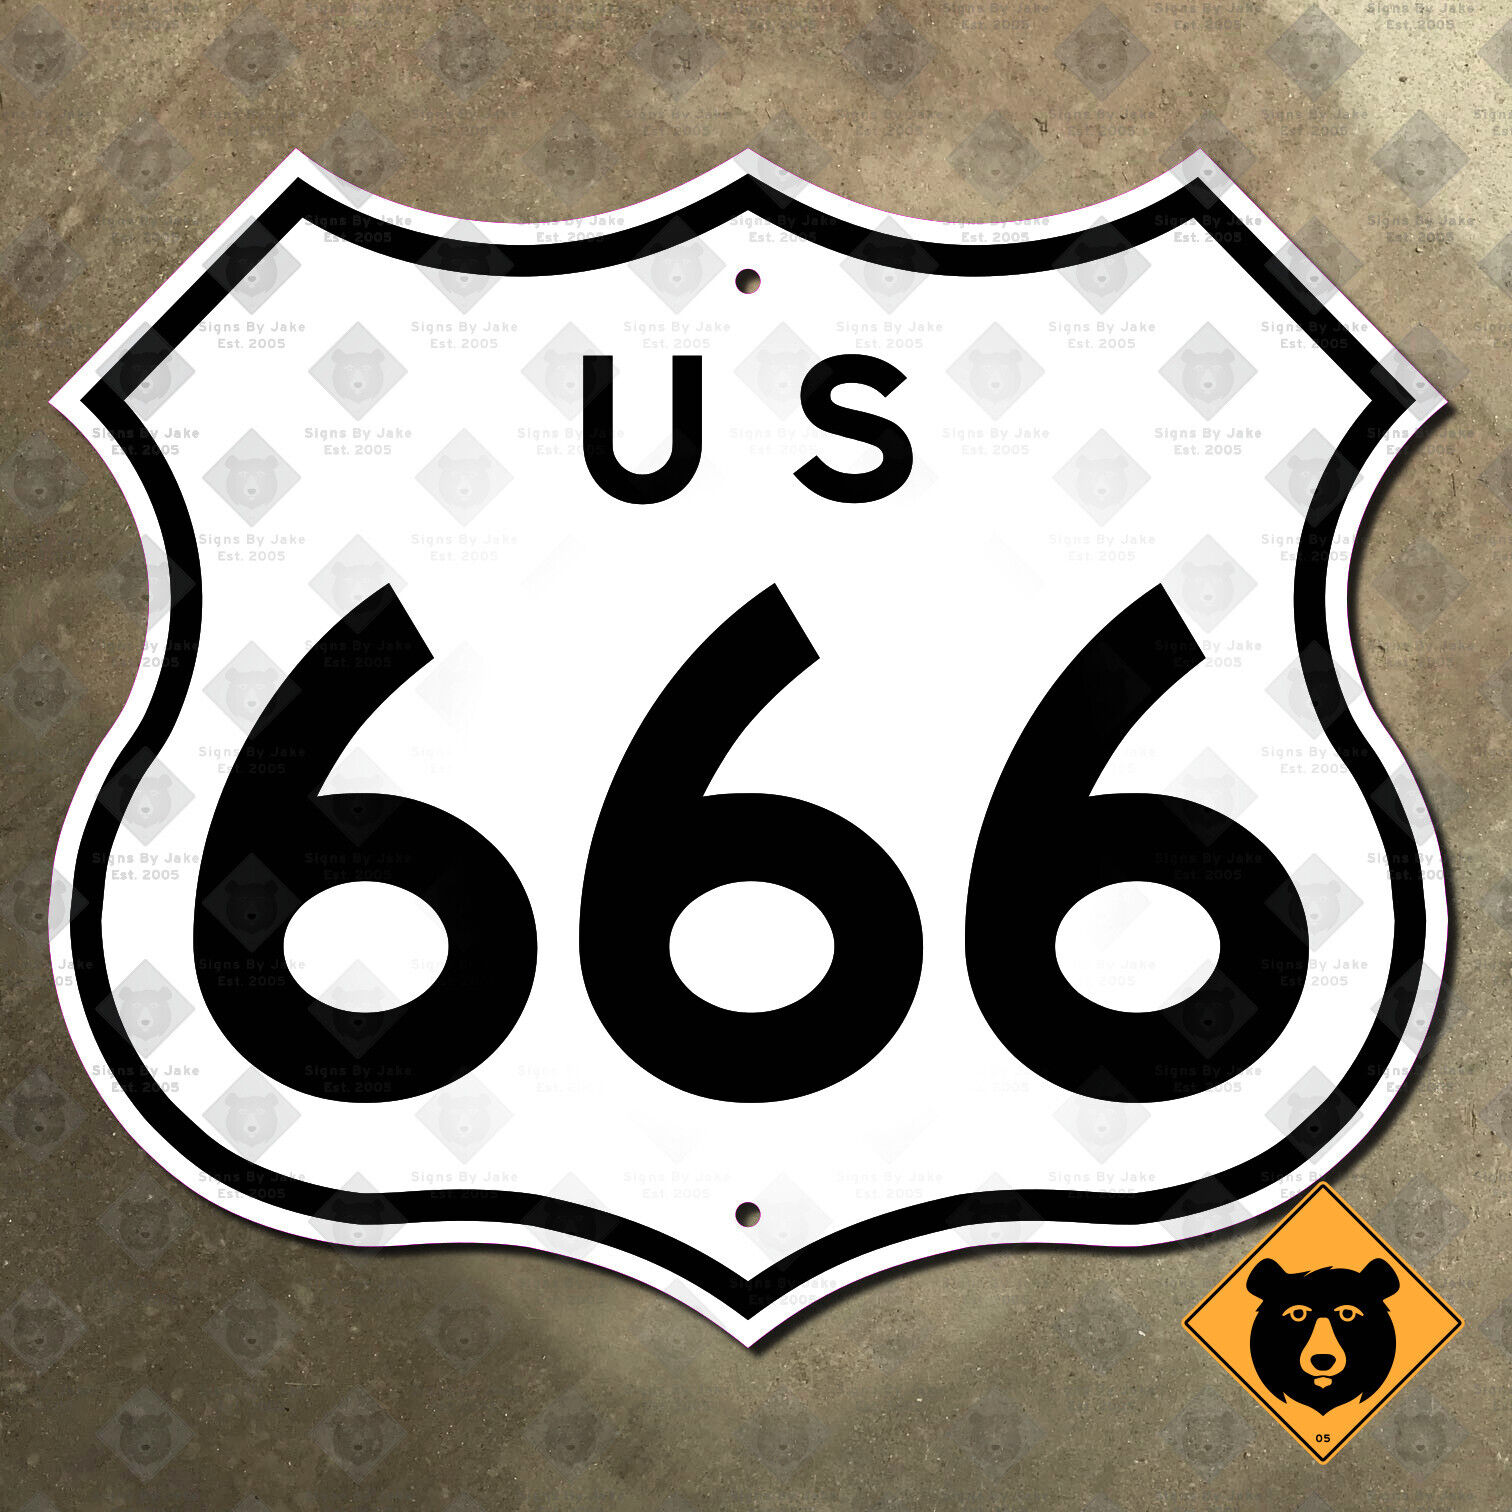 US route 666 Devil\'s Highway Four Corners marker road sign 1957 13x11